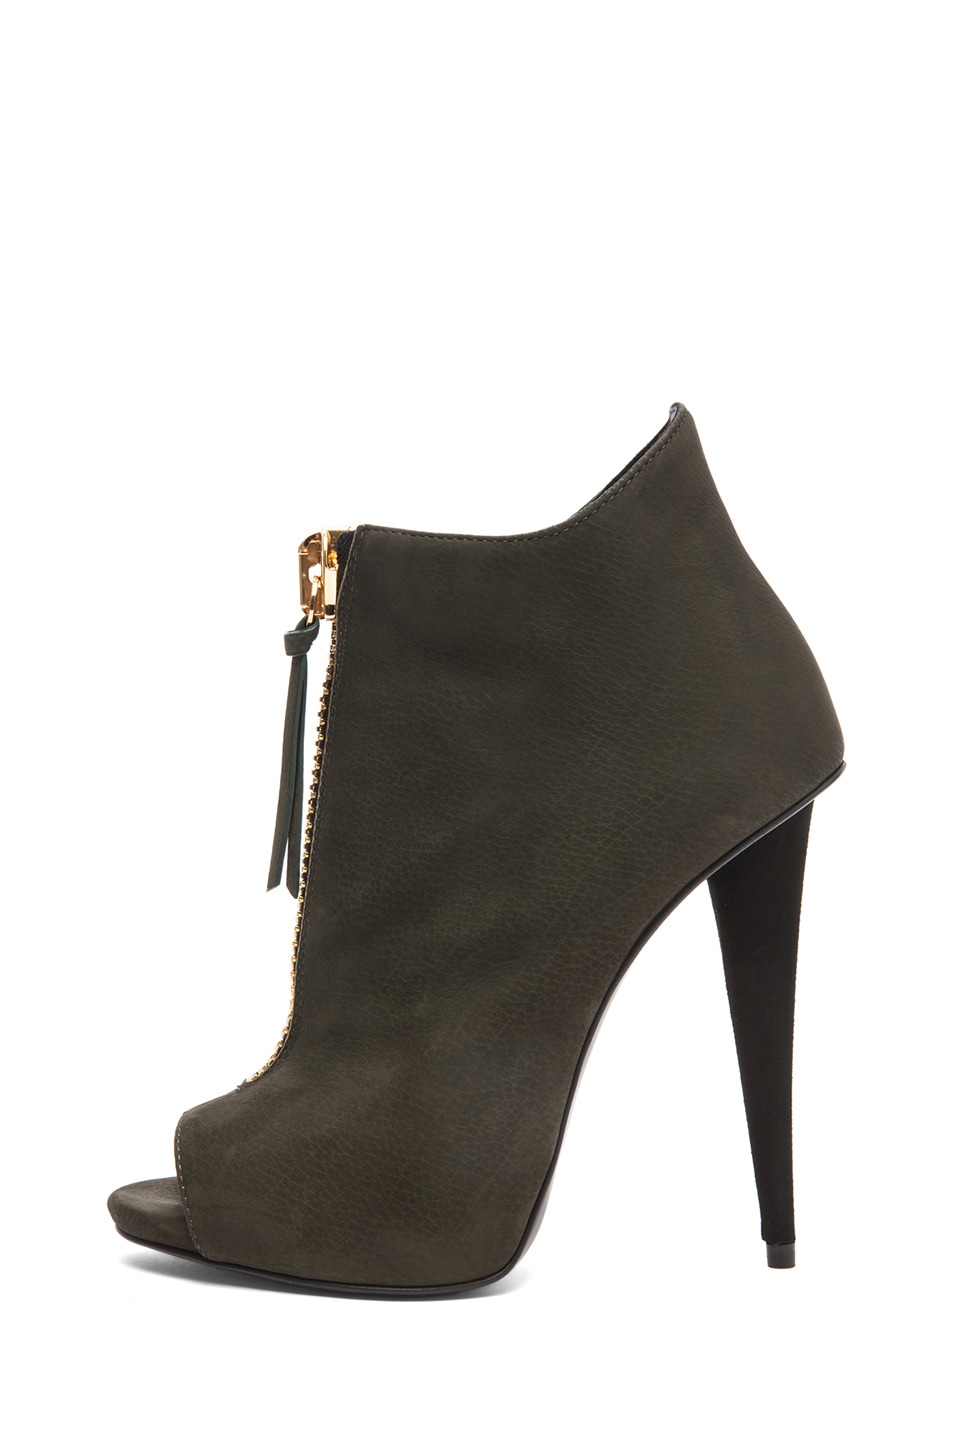 Image 1 of Giuseppe Zanotti Suede Zip Up Ankle Boot in Olive